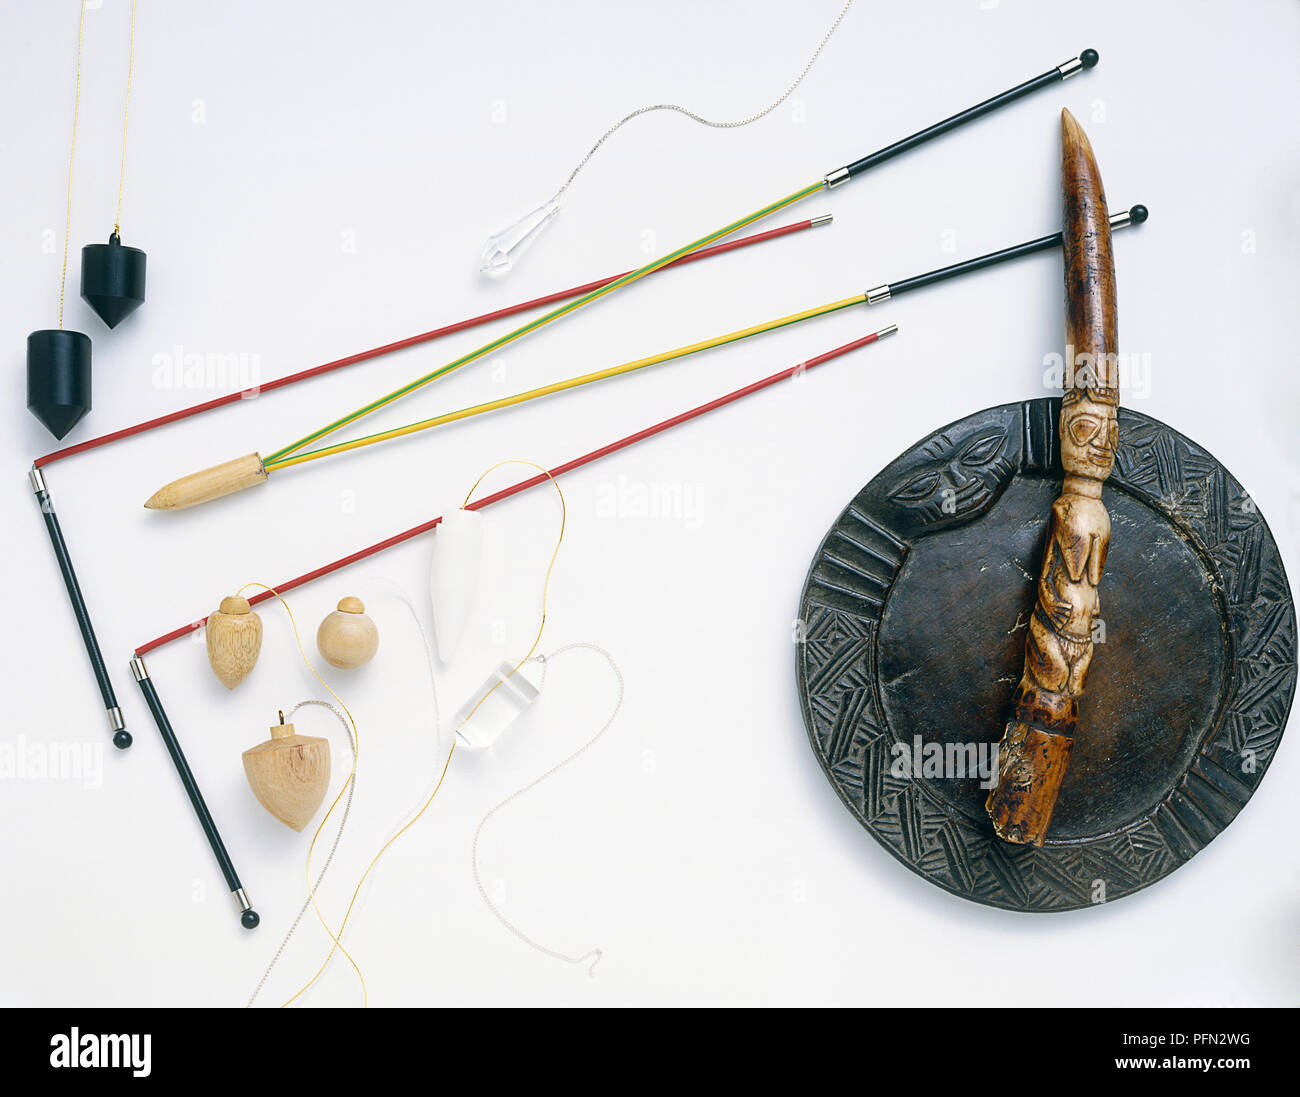 Witchcraft and fortune-telling paraphernalia, including pendulums, dowsing rod, and a divination tapper and bowl from Nigeria, view from above Stock Photo